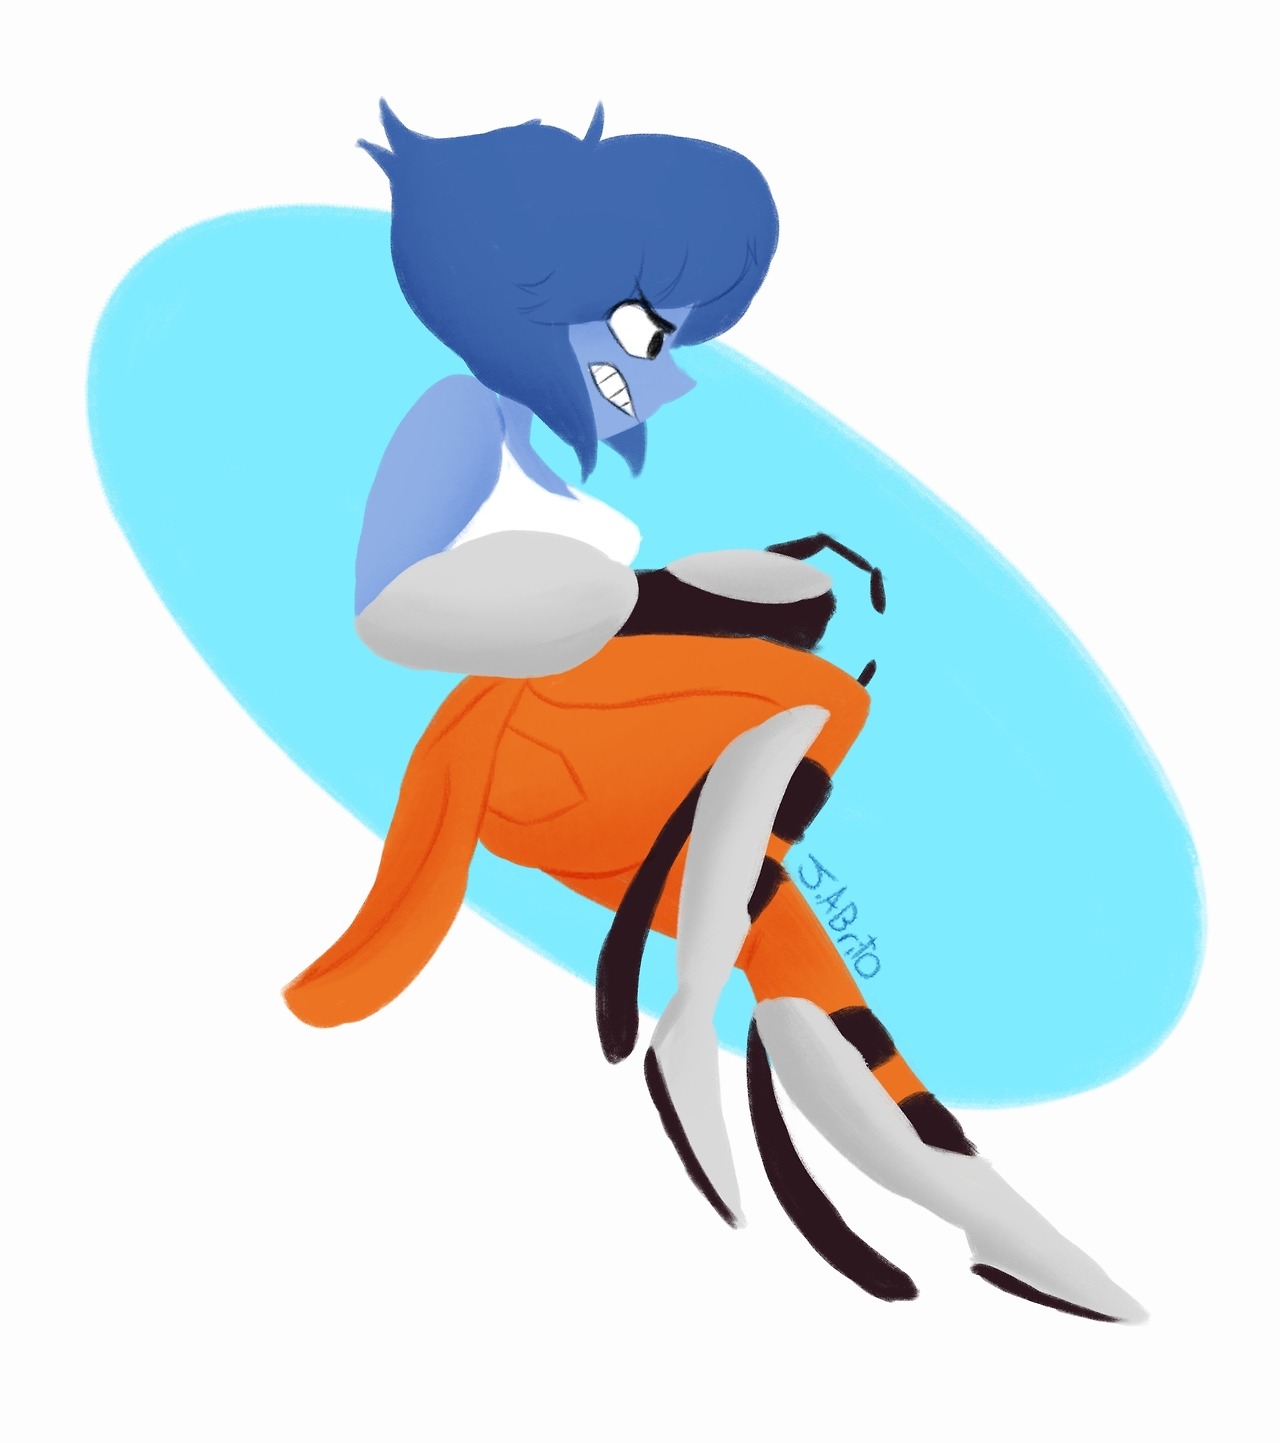 Lapis as Chell from Portal!